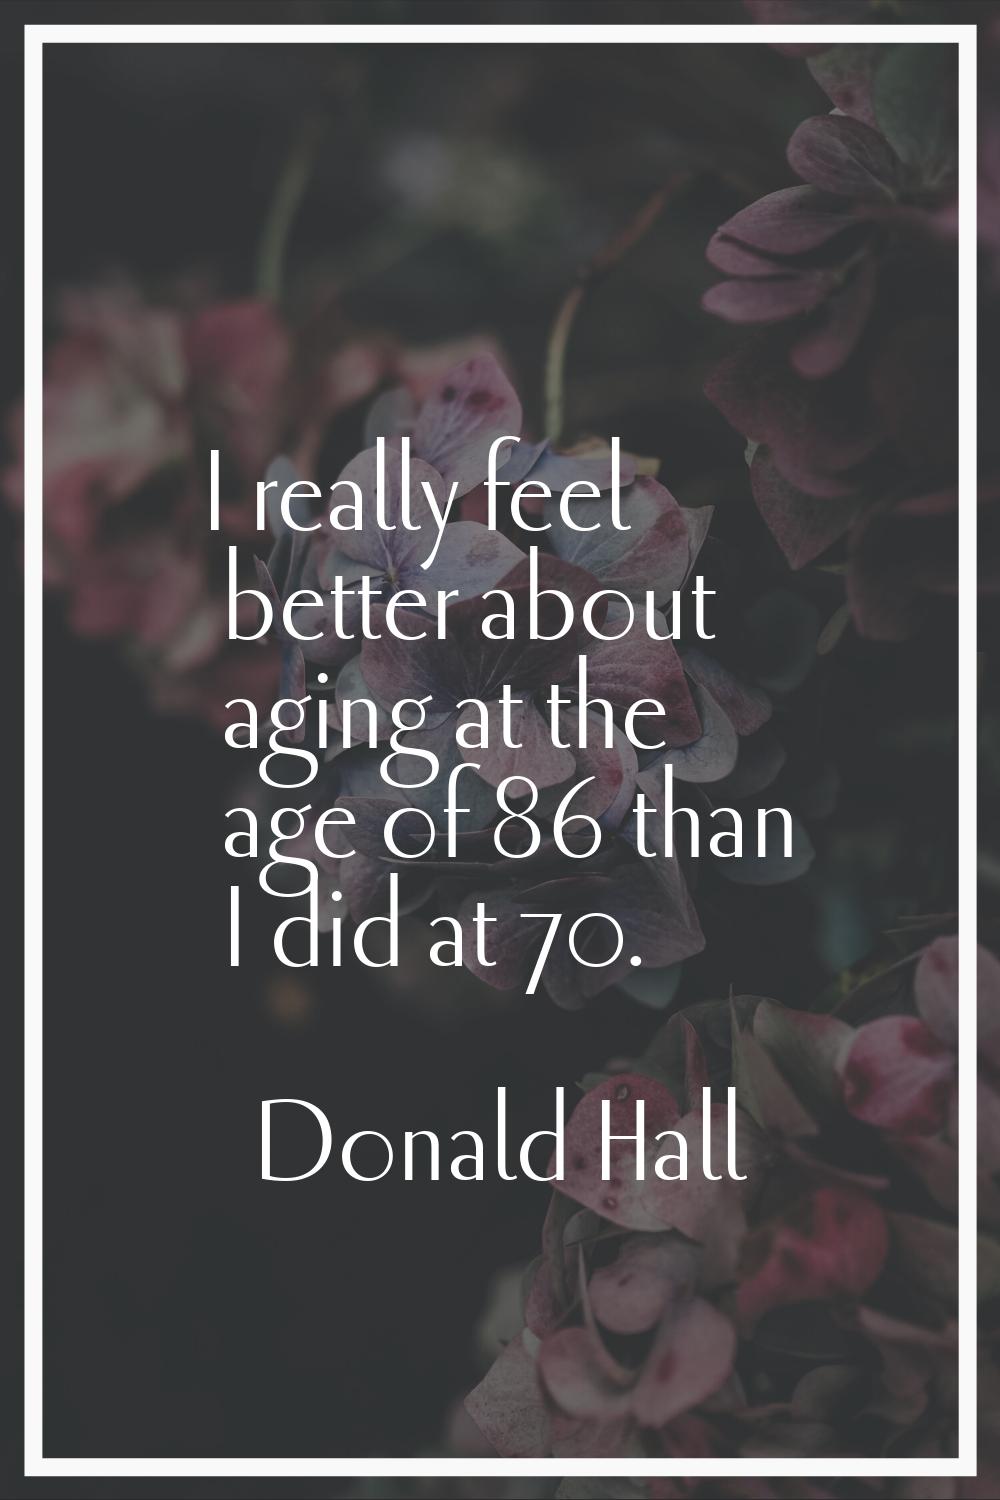 I really feel better about aging at the age of 86 than I did at 70.